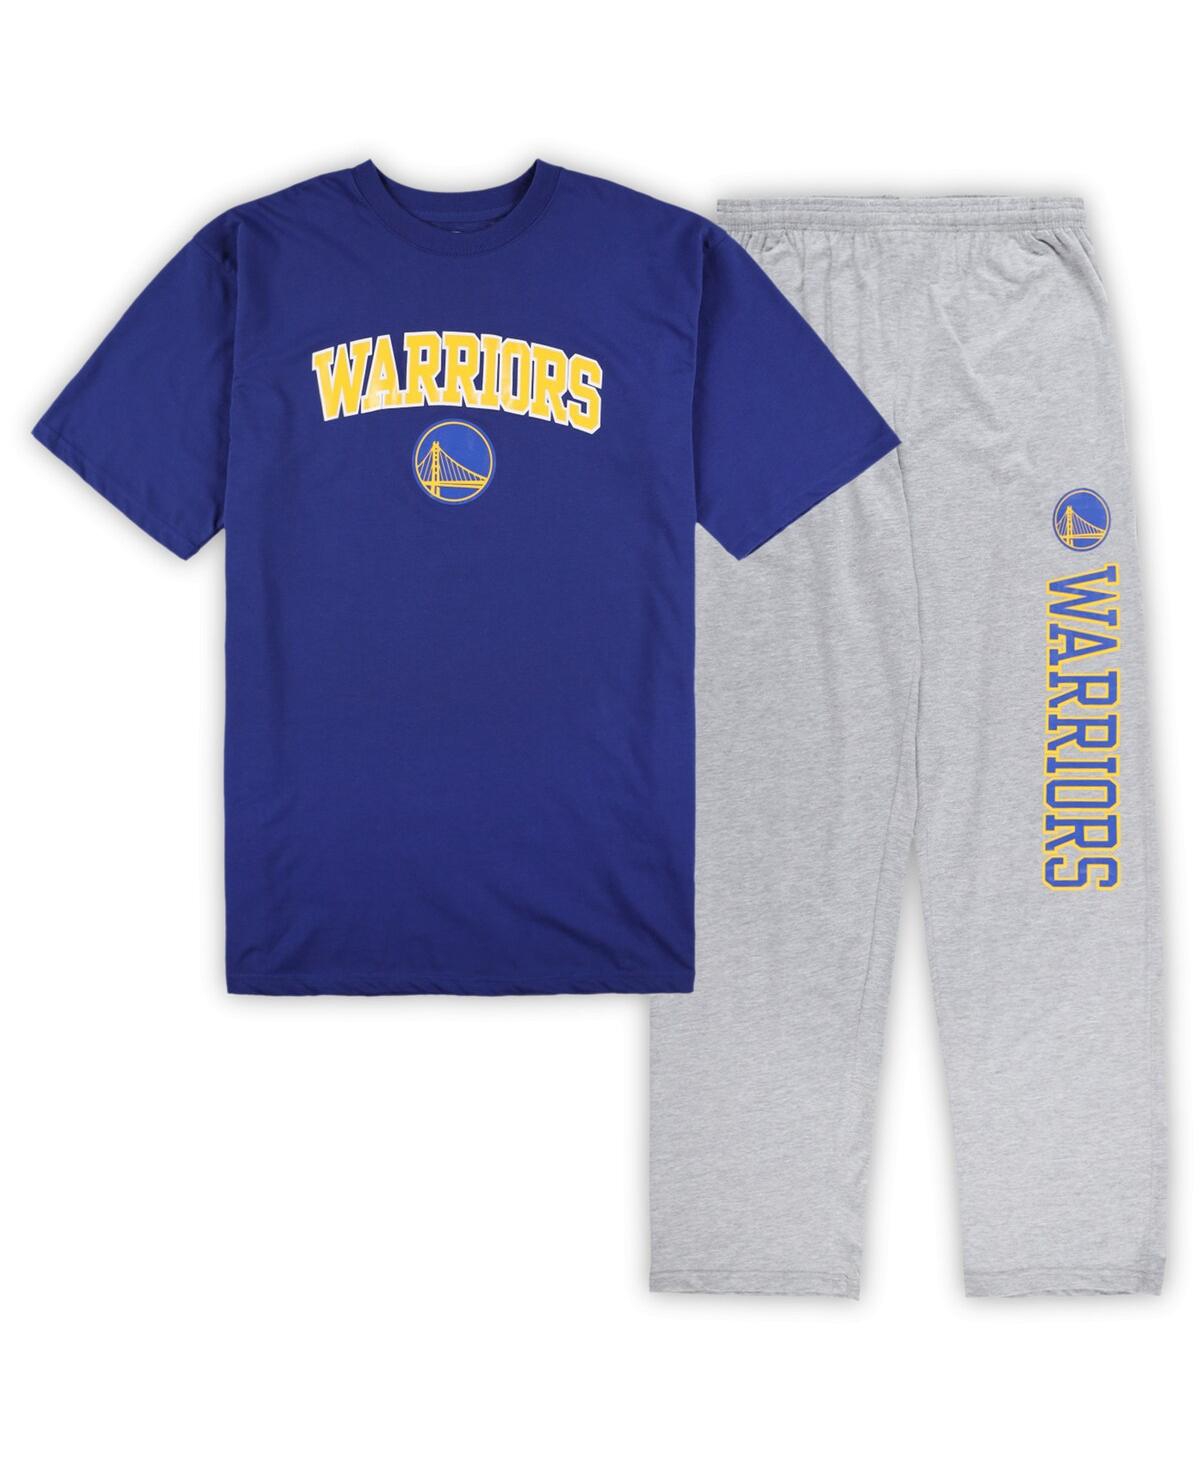 Men's Concepts Sport Royal, Heather Gray Golden State Warriors Big and Tall T-shirt and Pajama Pants Sleep Set - Royal, Heather Gray